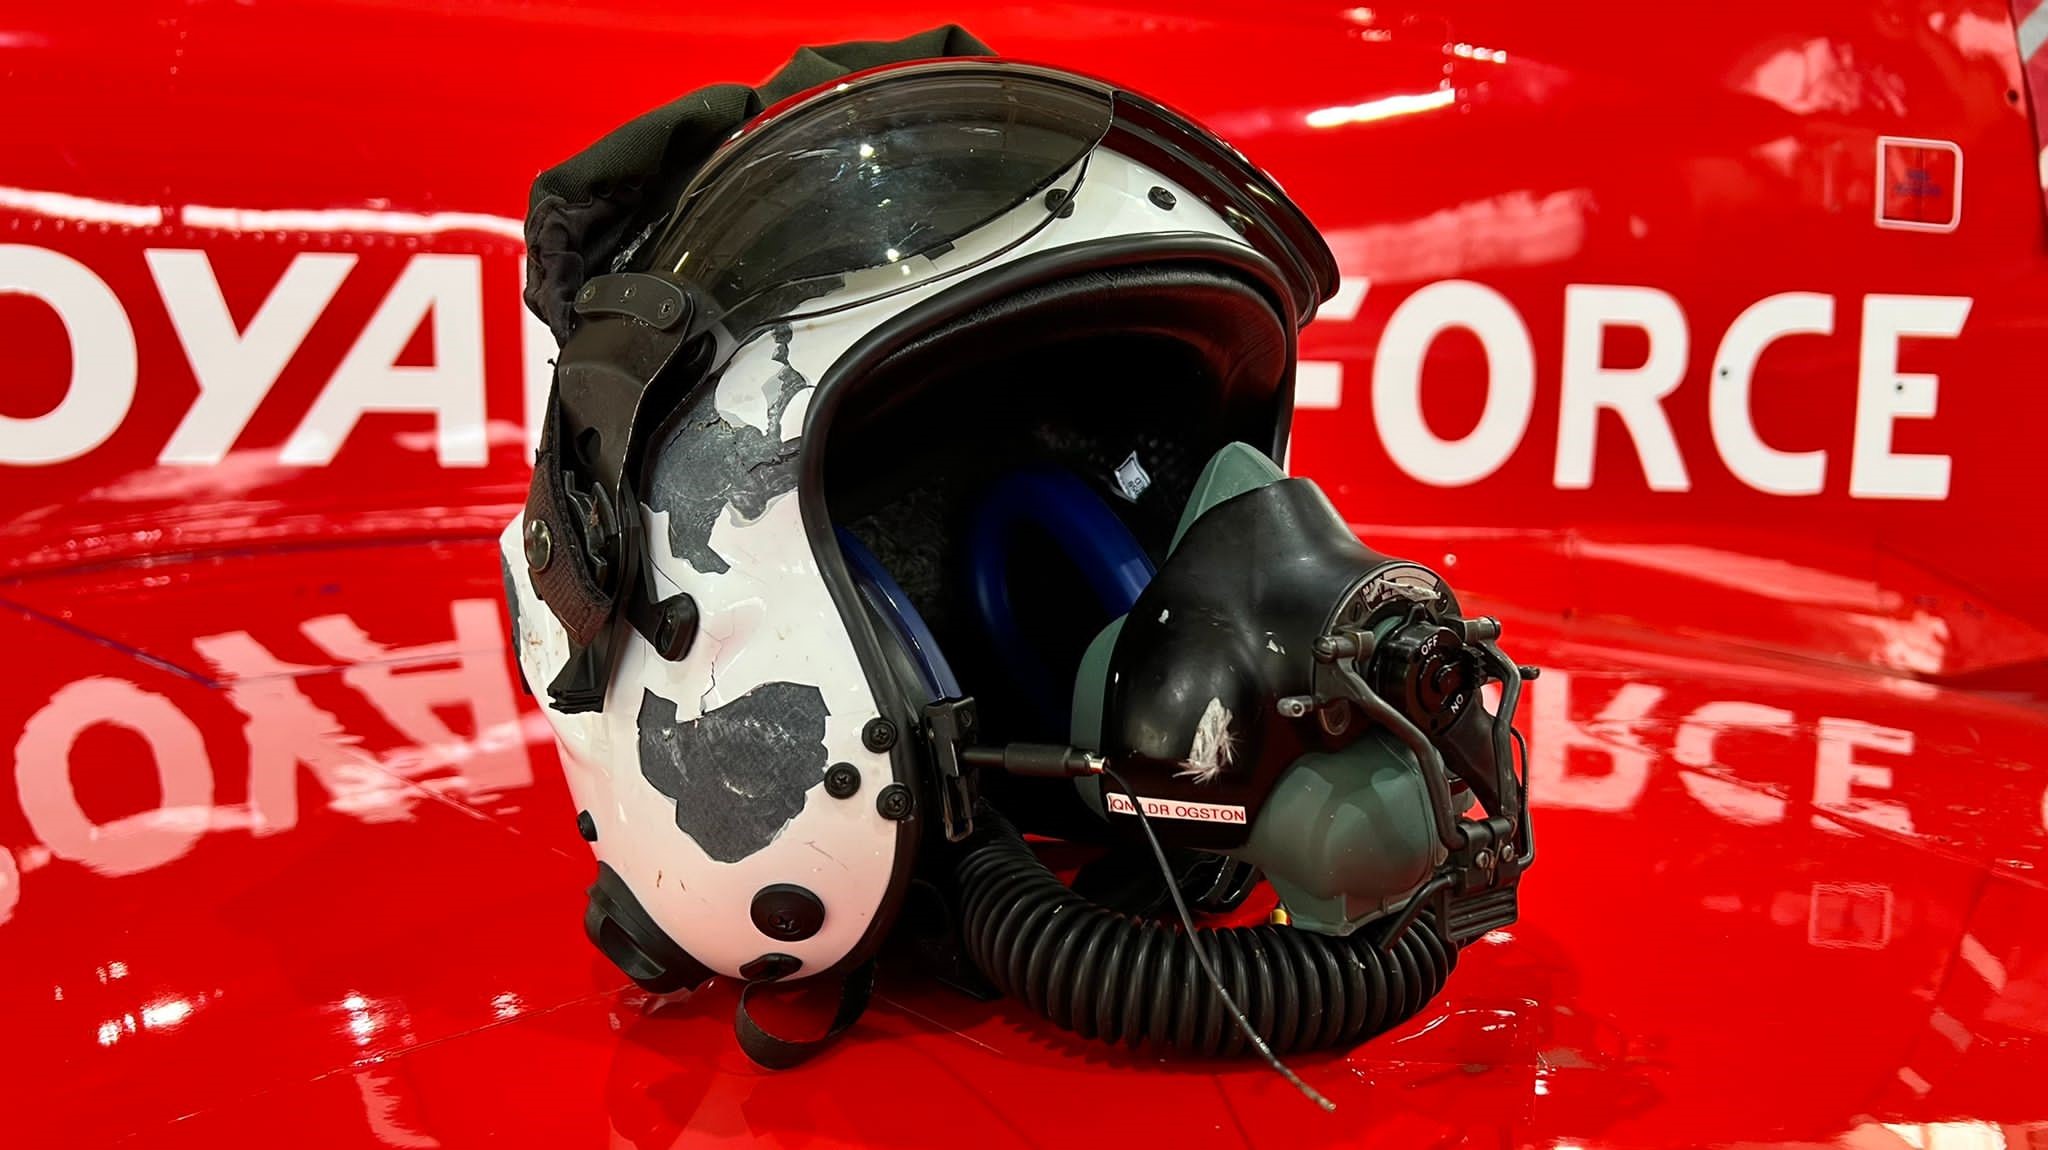 Red 6's flying helmet, showing signs of the impact.